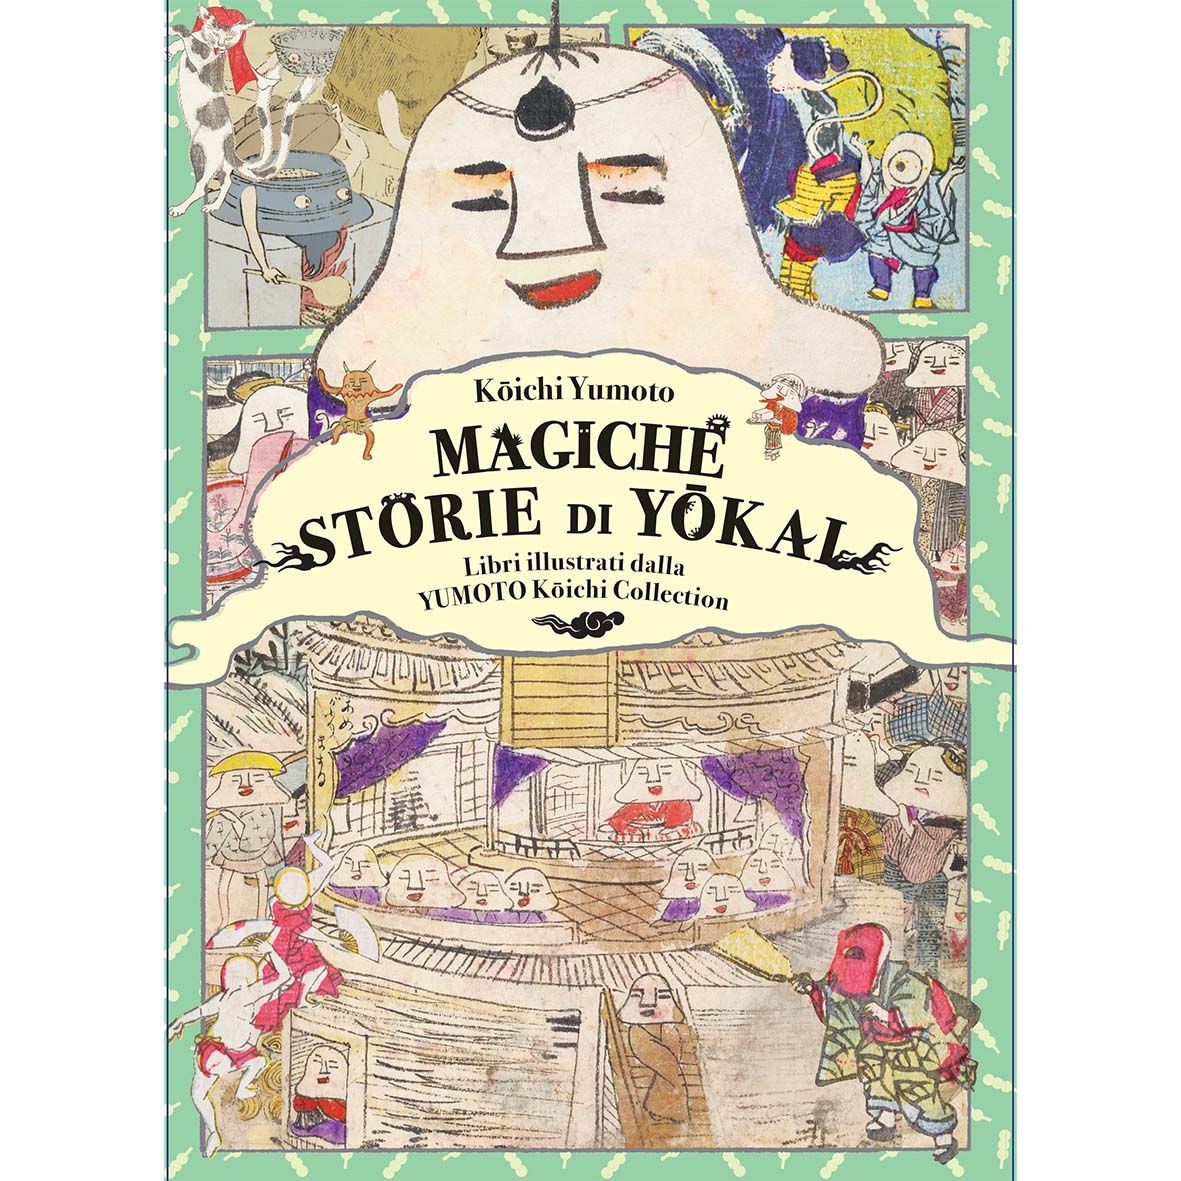 Magical yōkai stories - Illustrated books from the Yumoto Kōichi Collection